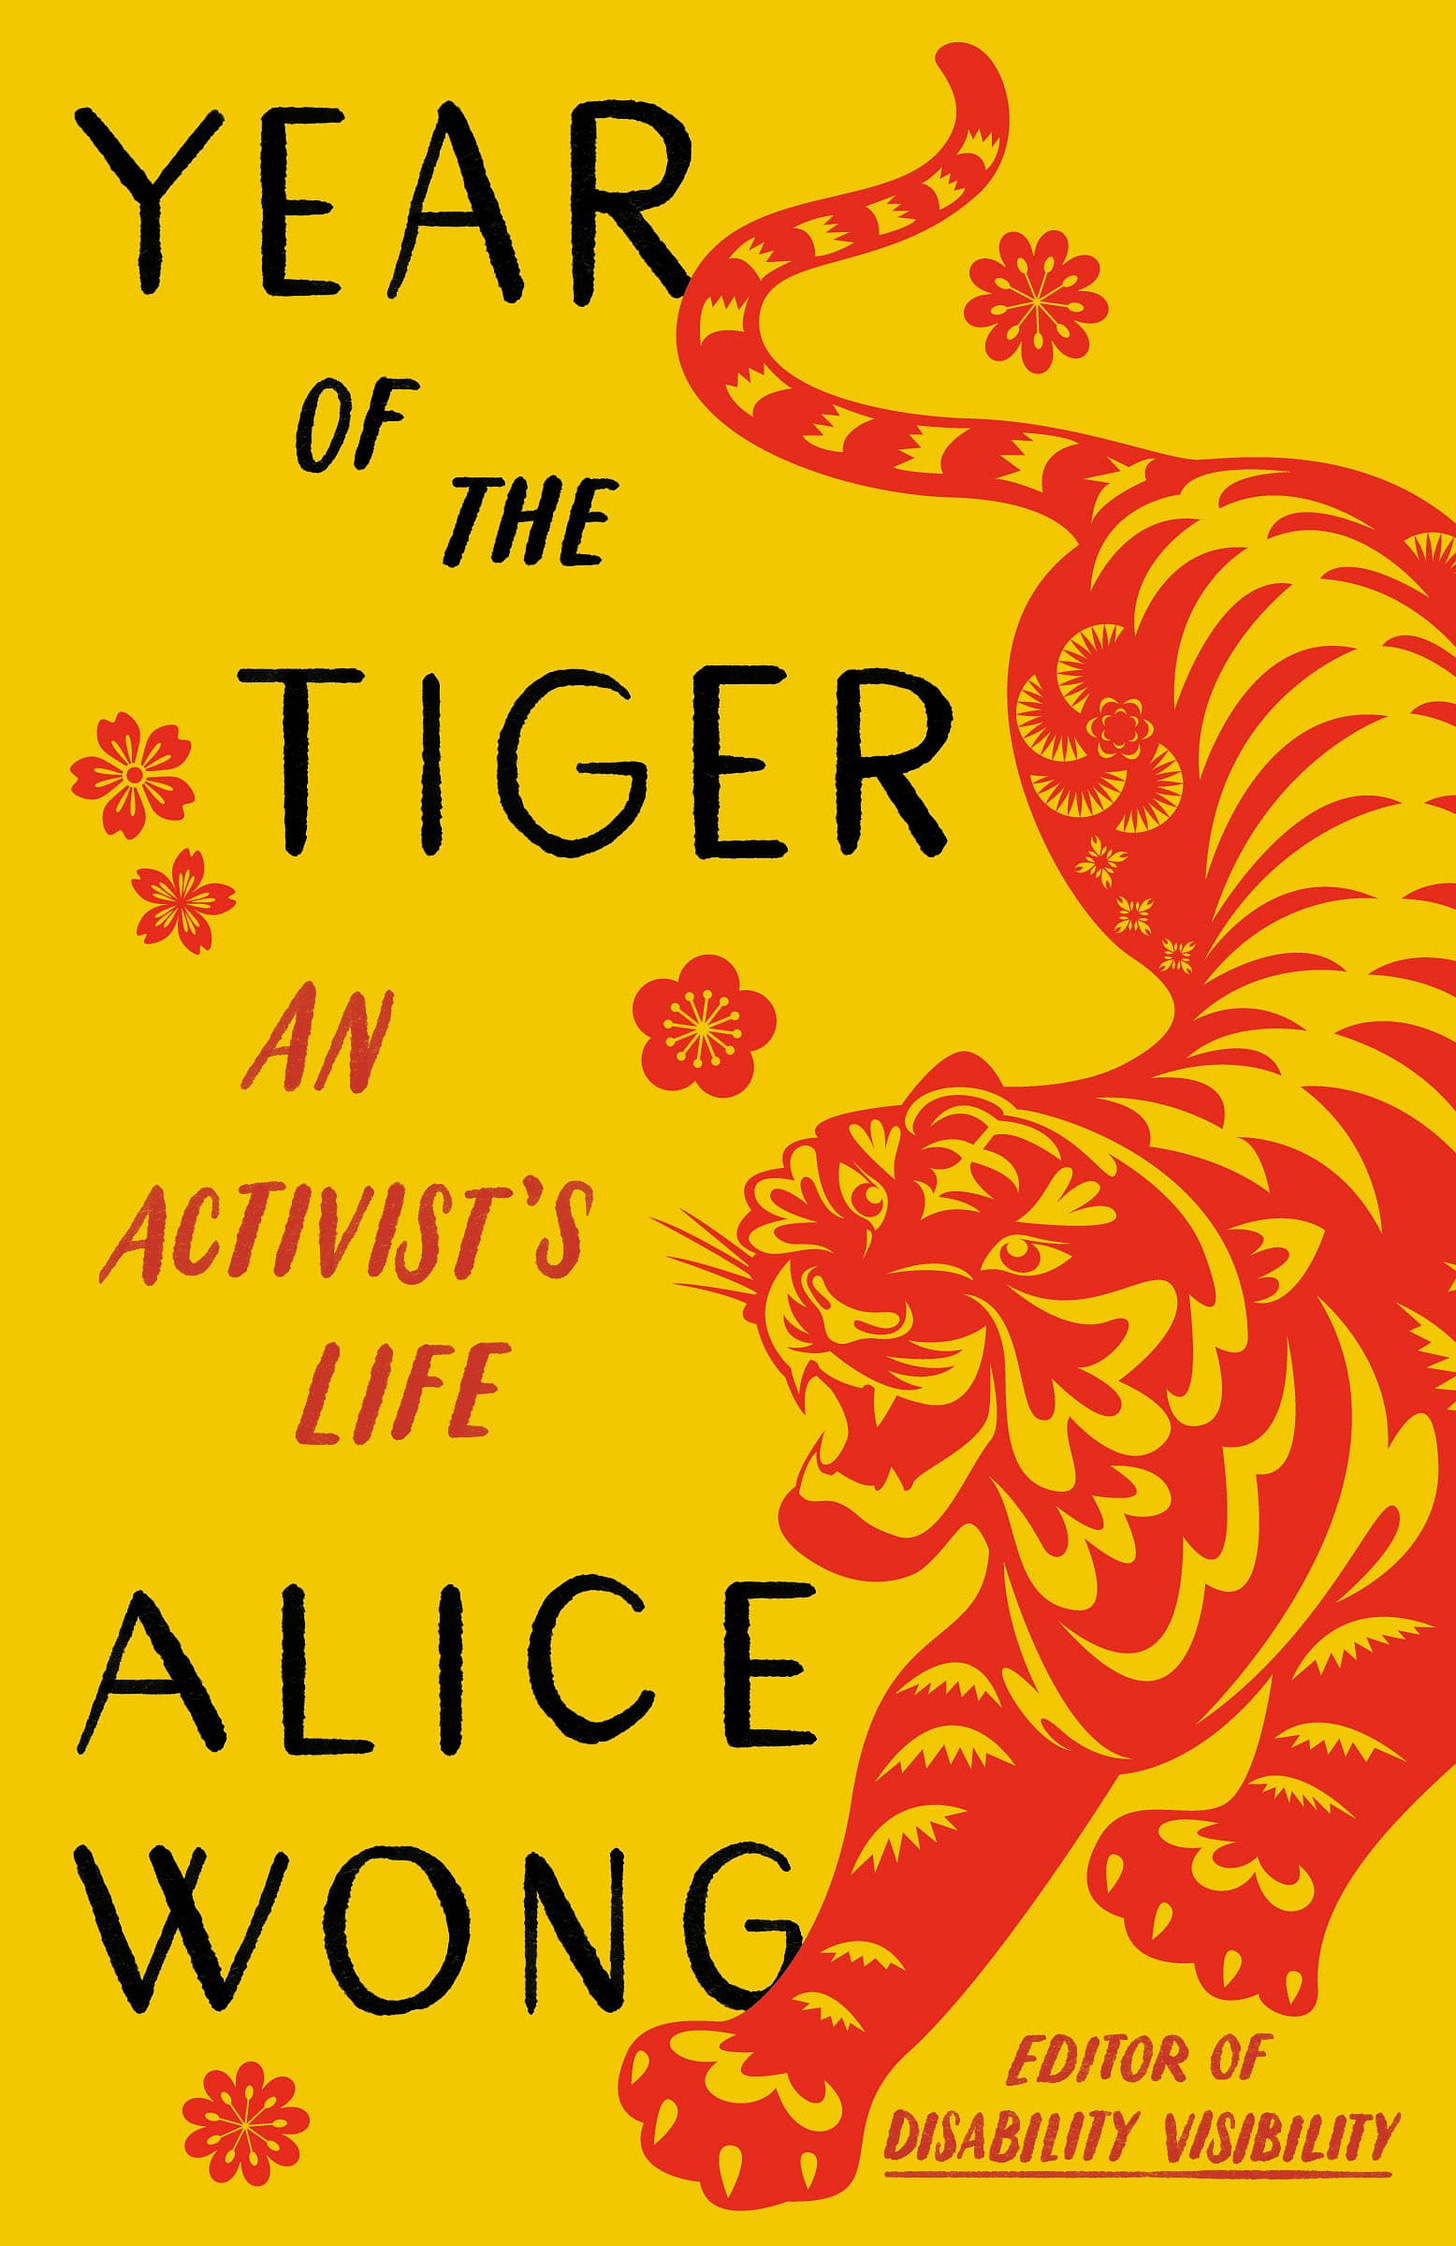 Book cover for Year of the Tiger: An Activist’s Life with a marigold yellow background. On the right side is an illustration of a crouching tiger in red in the style of Chinese paper cuttings with delicate cutouts in various shapes giving form and definition to the tiger. The tiger has a fierce expression, eyes and jaws wide open, teeth bared. The tiger has large paws with four claws extended. On the left in black large text YEAR OF THE TIGER at the top and ALICE WONG below. In the center in smaller red text AN ACTIVIST’S LIFE and in the lower right corner EDITOR OF DISABILITY VISIBILITY. Small, delicate red flowers are sprinkled throughout. Book cover by Madeline Partner.